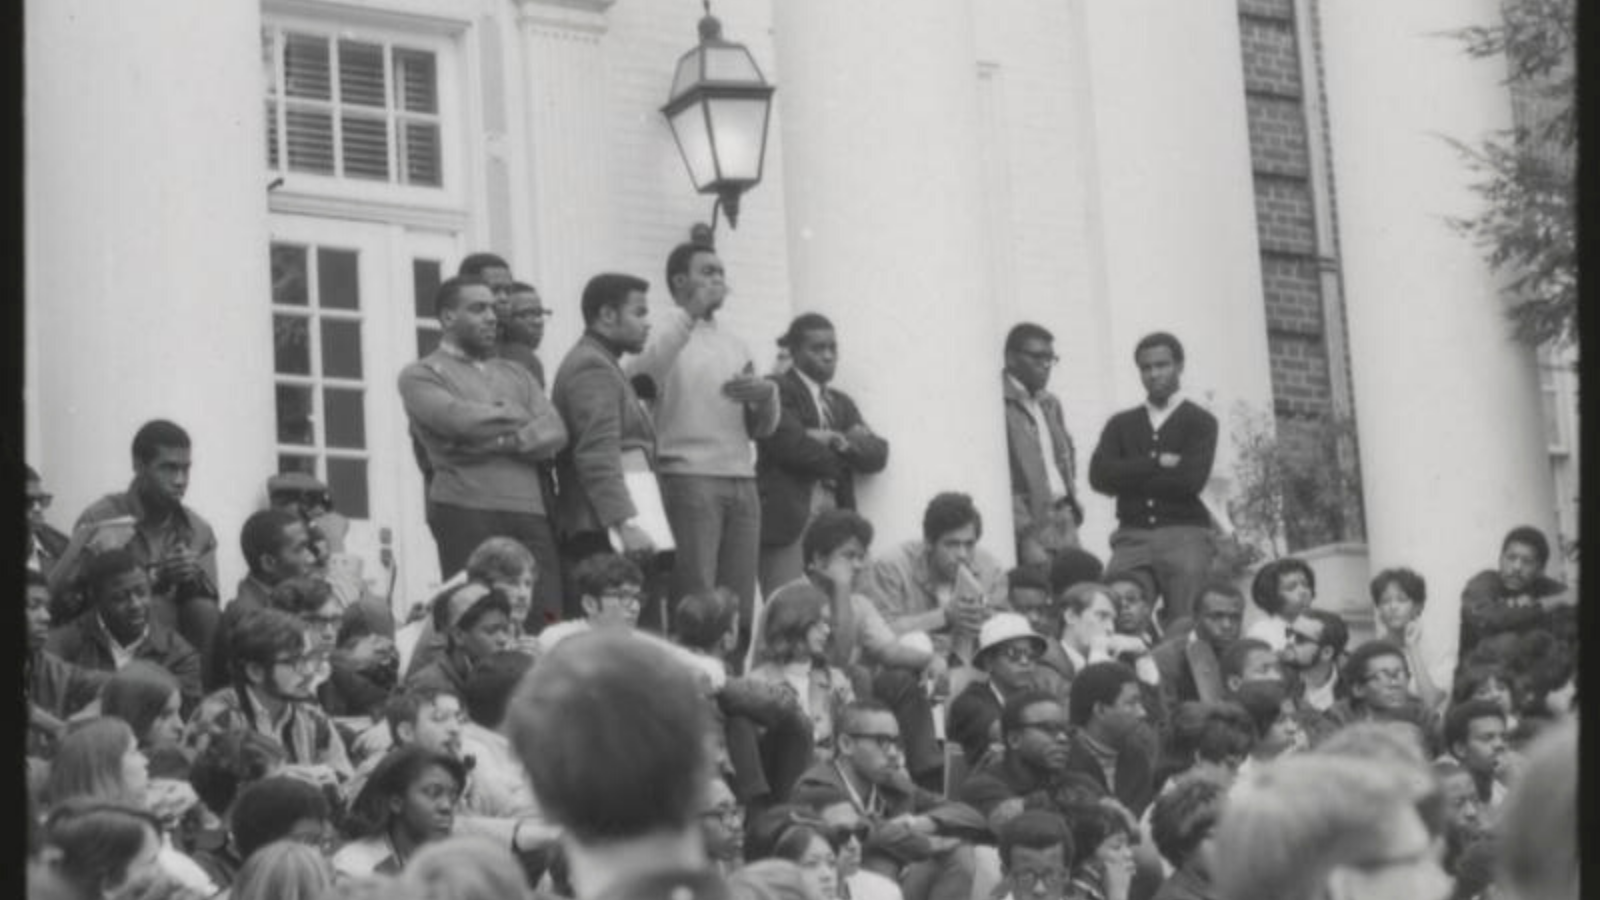 Claiming Their Space: Black Student Activism at the University of Maryland